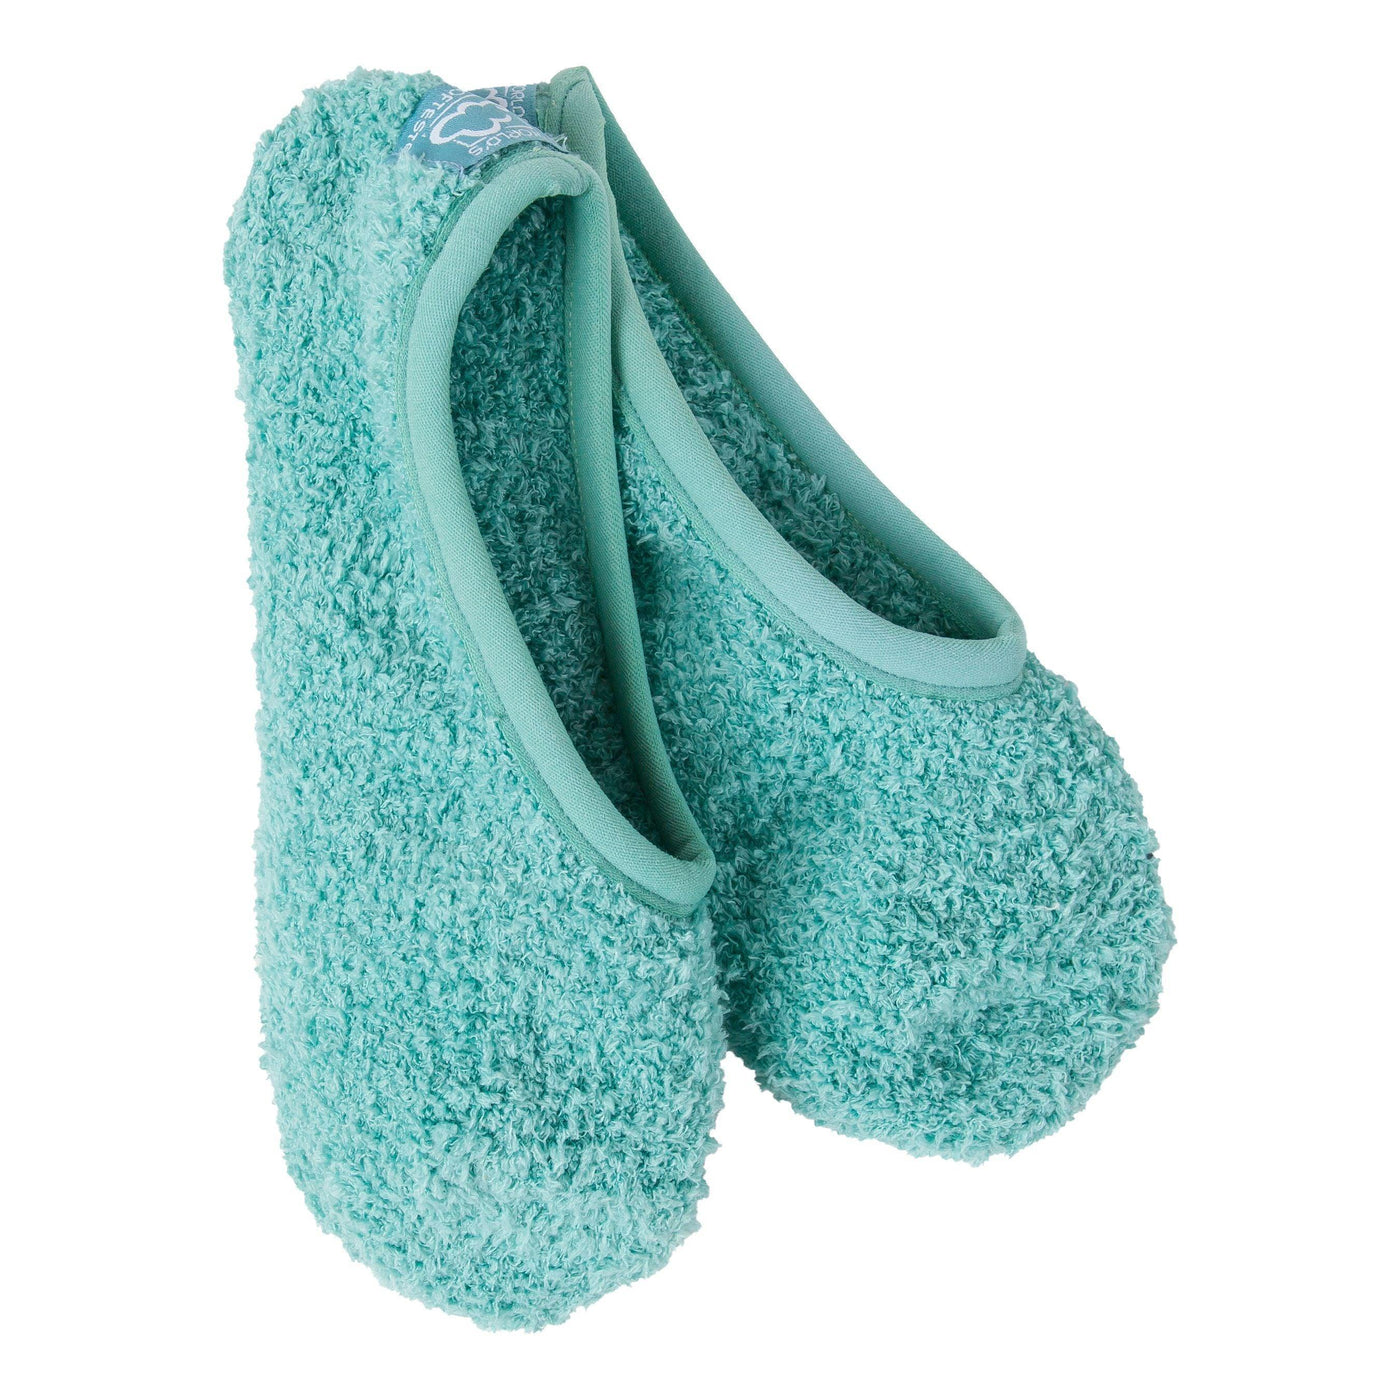 Cozy Collection, Footsie with Grippers - World's Softest - The Sock Monster